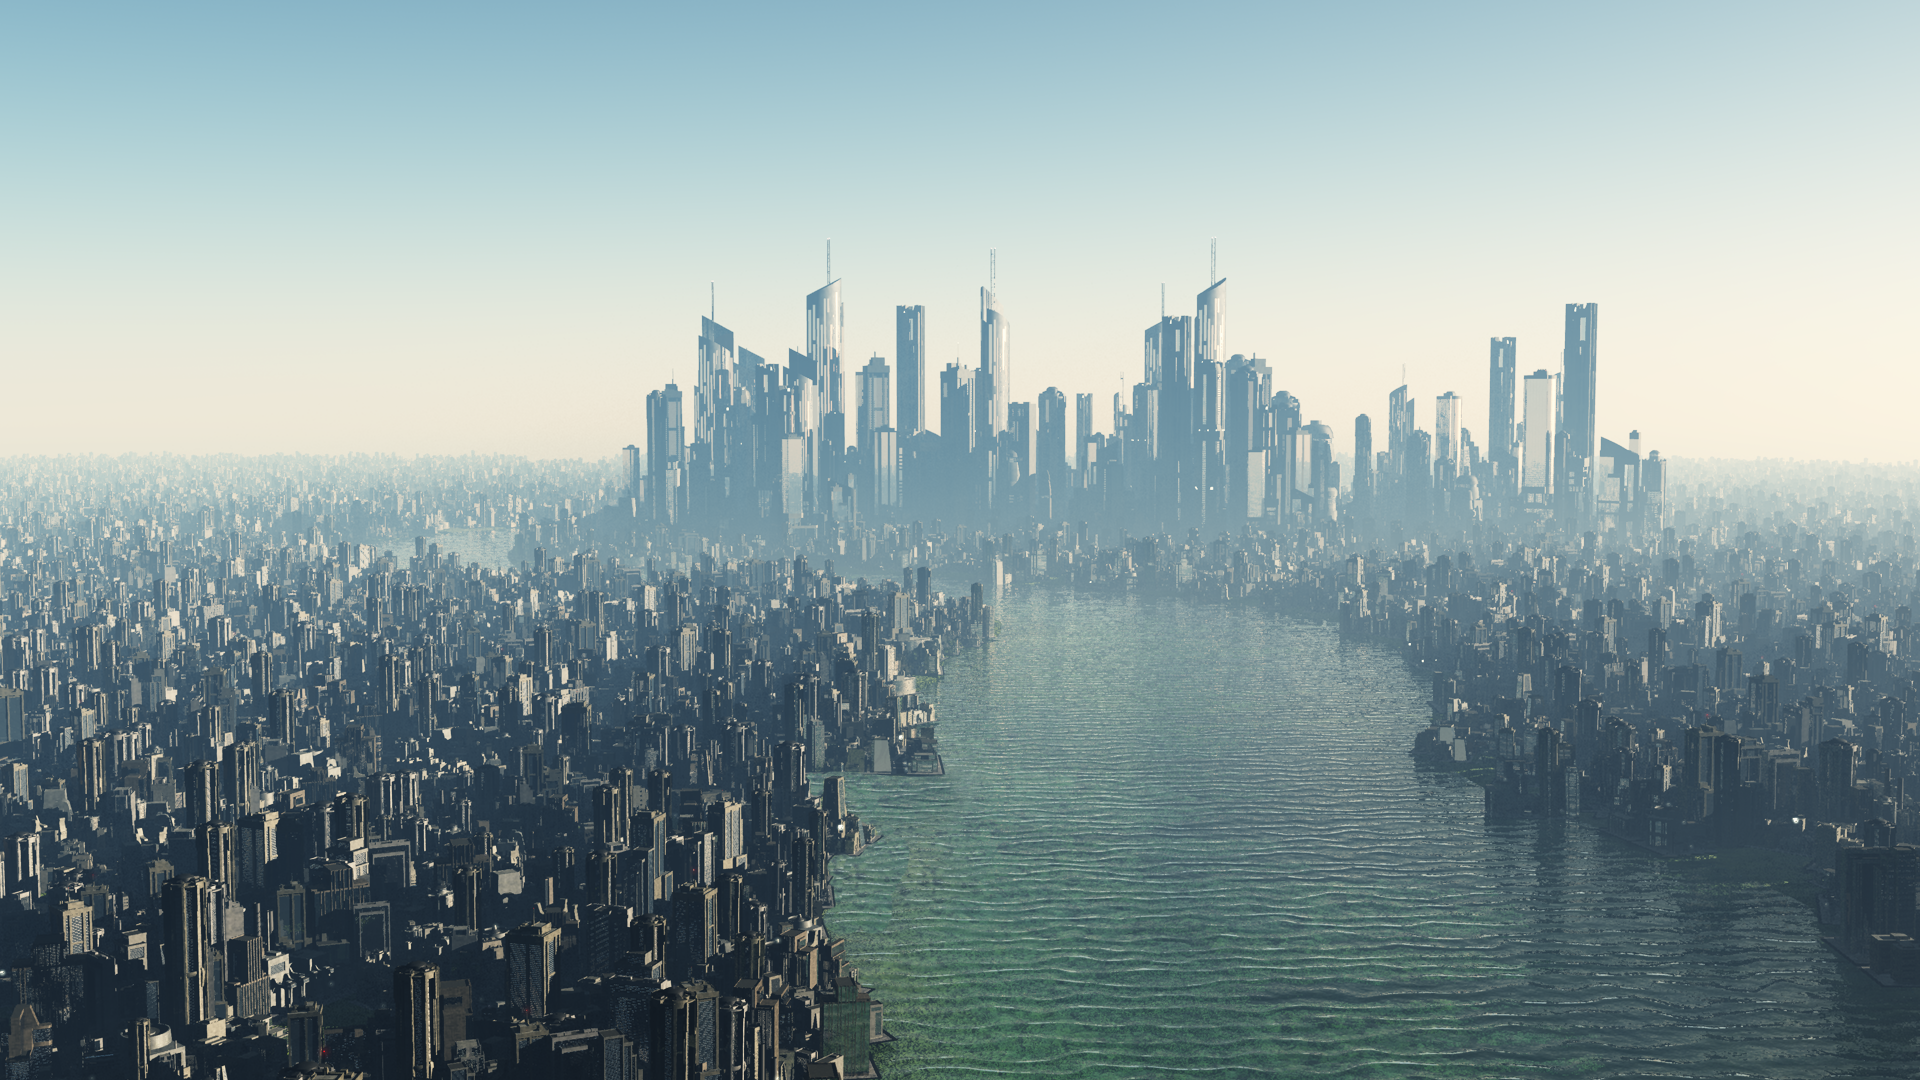 big_city_by_giuliodesign94-d3aa8fa.png